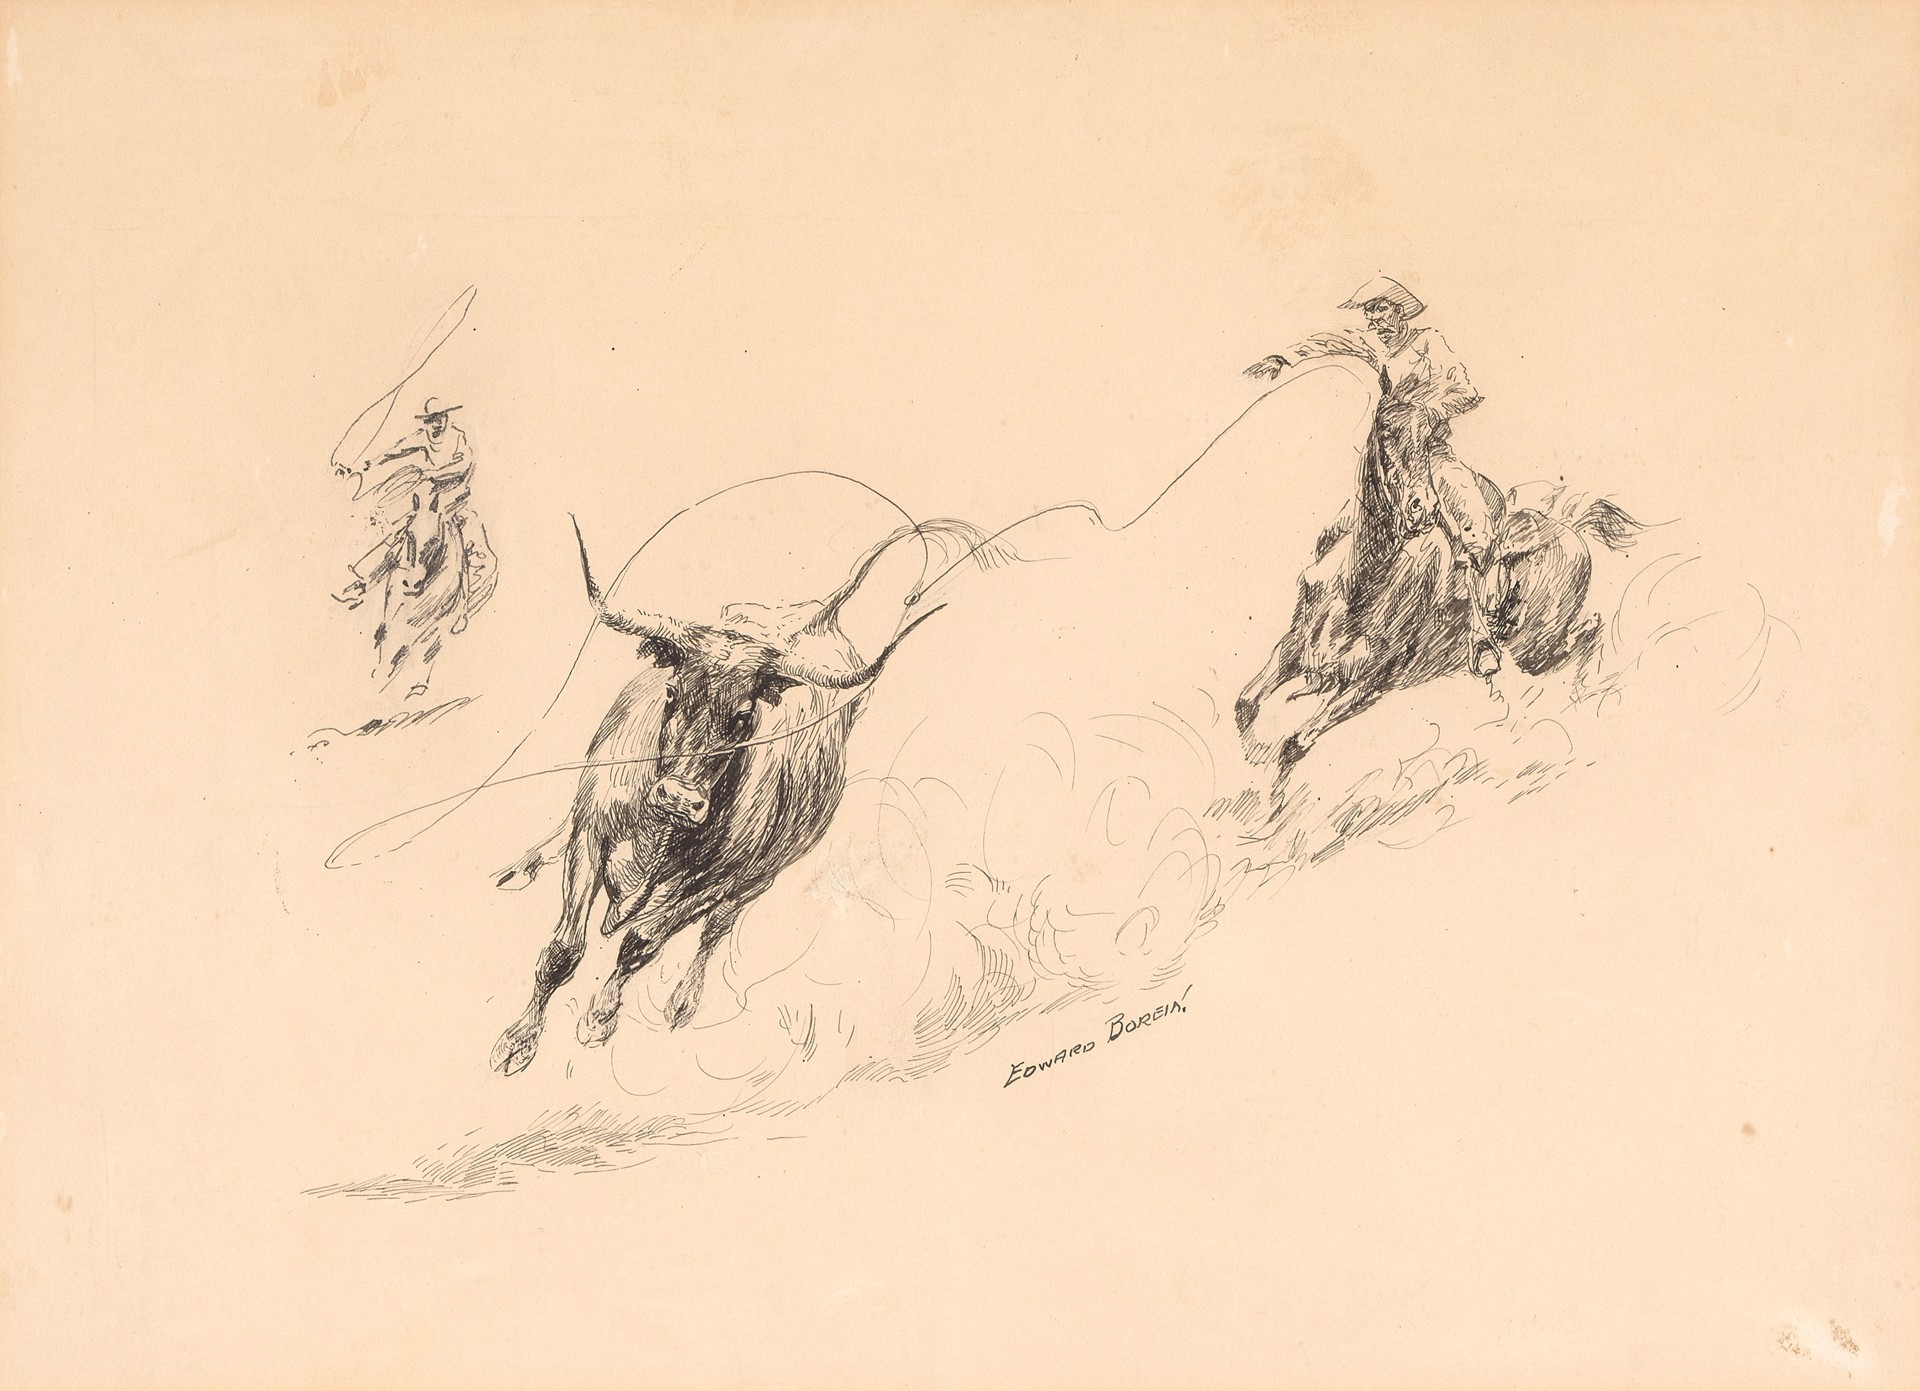 Roping a Steer by Edward Borein